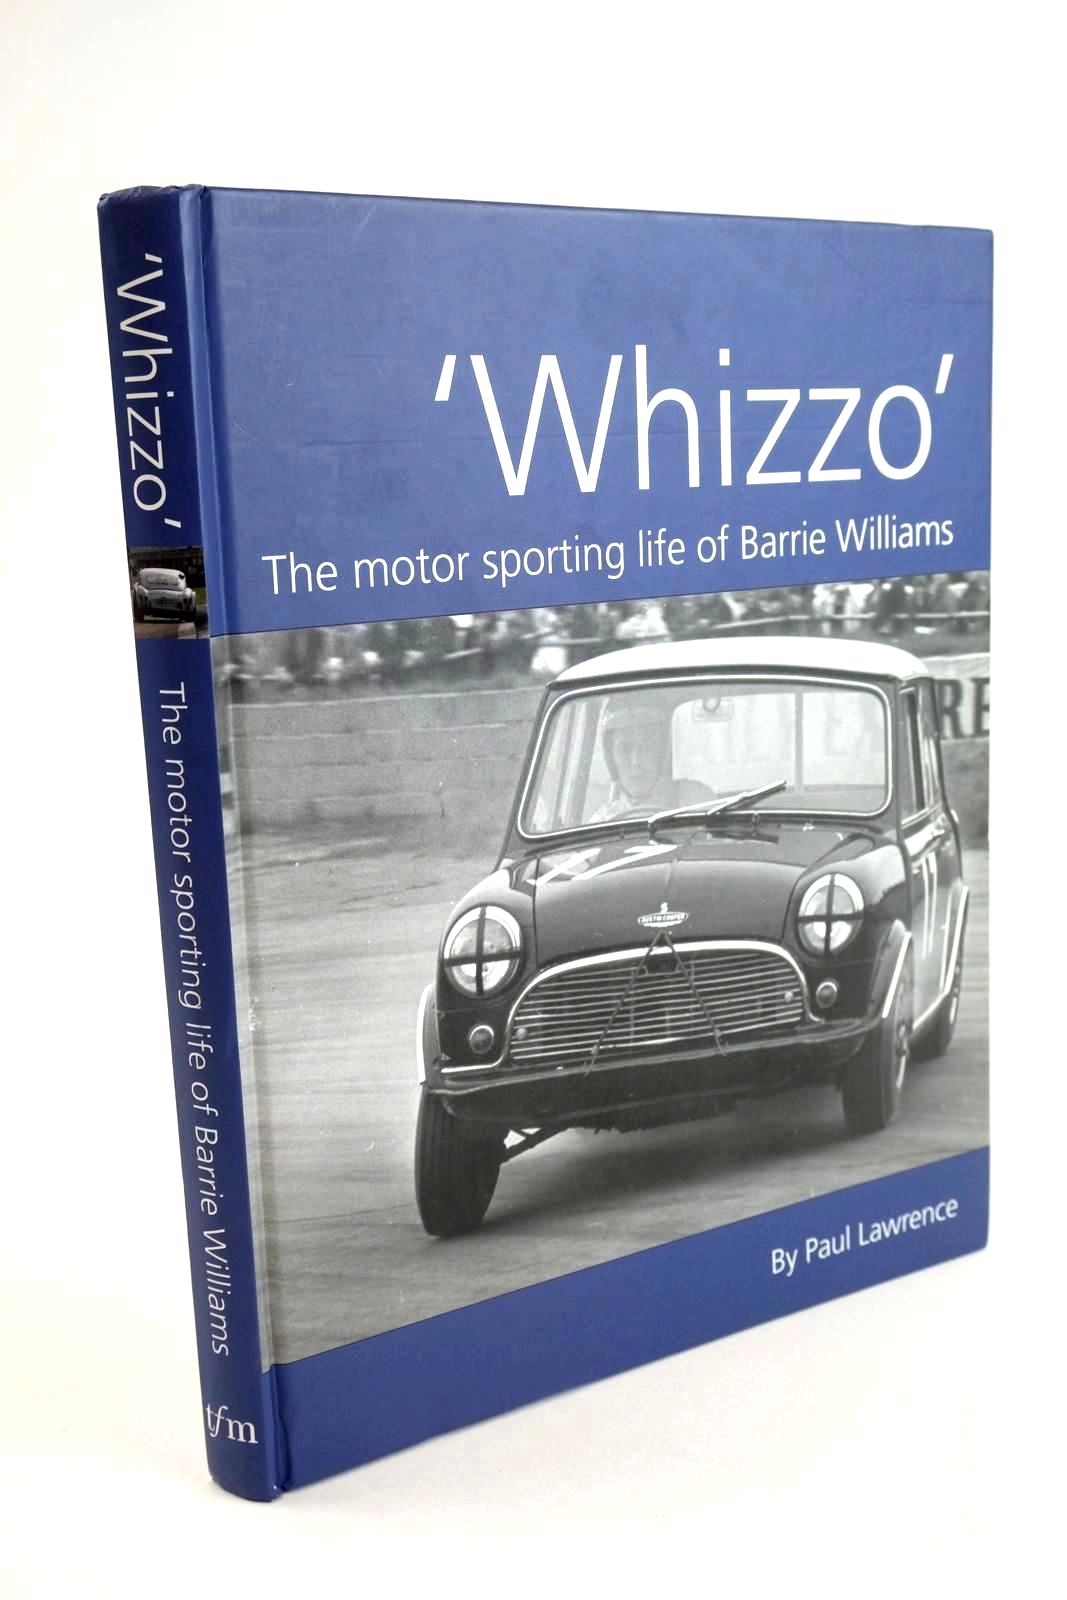 Photo of WHIZZO THE MOTOR SPORTING LIFE OF BARRIE WILLIAMS written by Lawrence, Paul published by TFM Publishing (STOCK CODE: 1324050)  for sale by Stella & Rose's Books